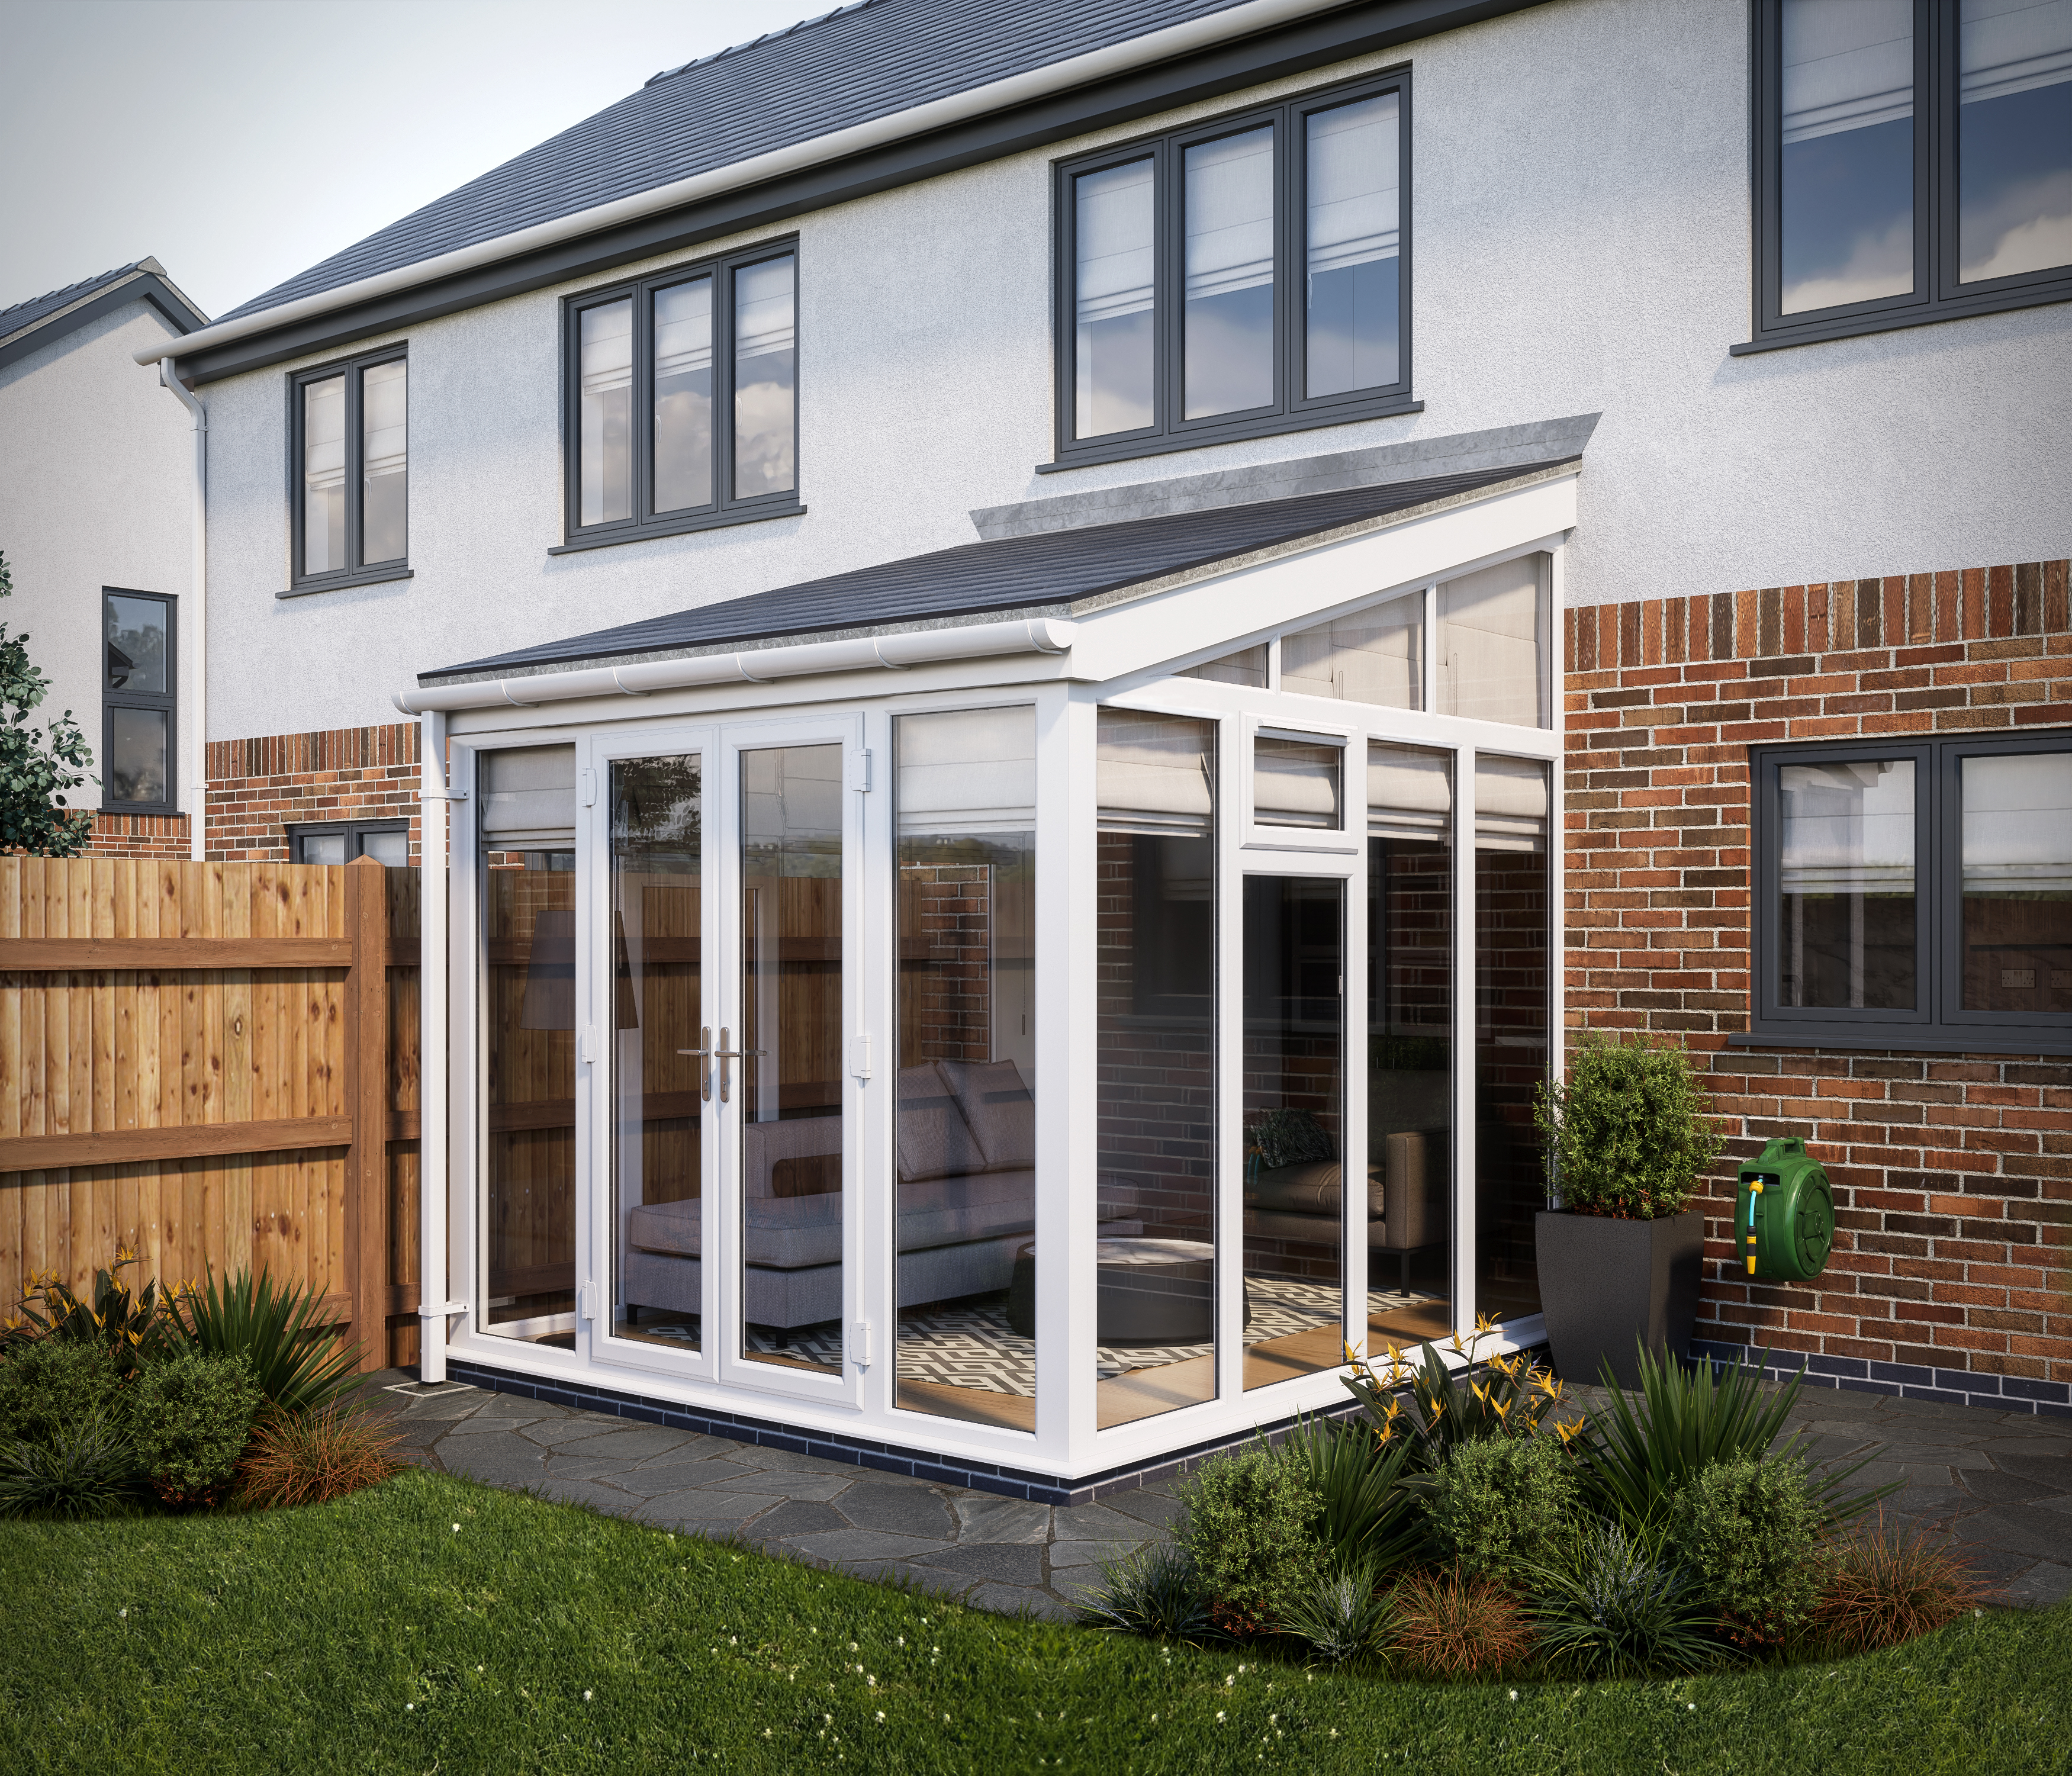 Image of SOLid Roof Full Height Lean to Conservatory White Frames with Titanium Grey Tiles - 13 x 13ft